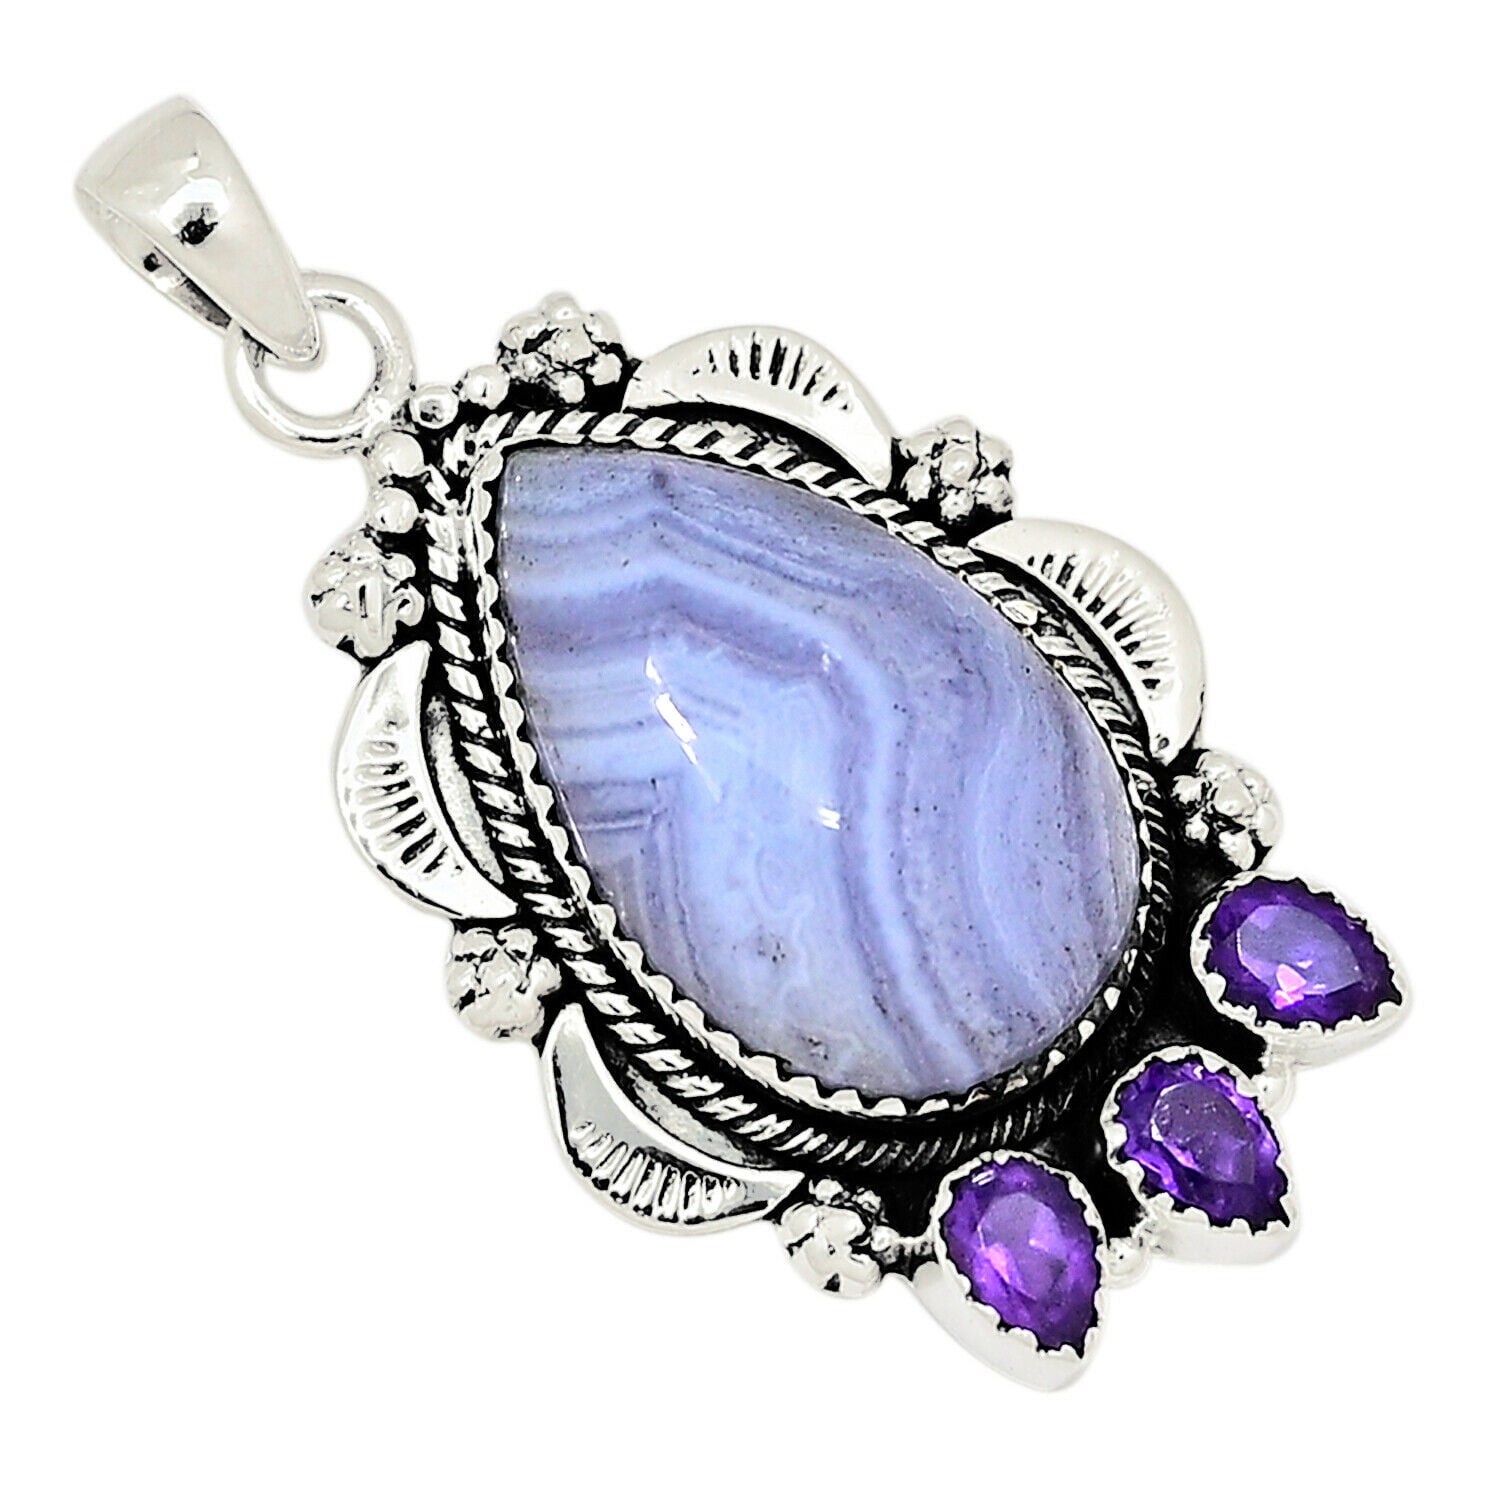 Agate Druze Heart Pendant Natural Healing Crystal Set in Sterling Silver .925 Pendant